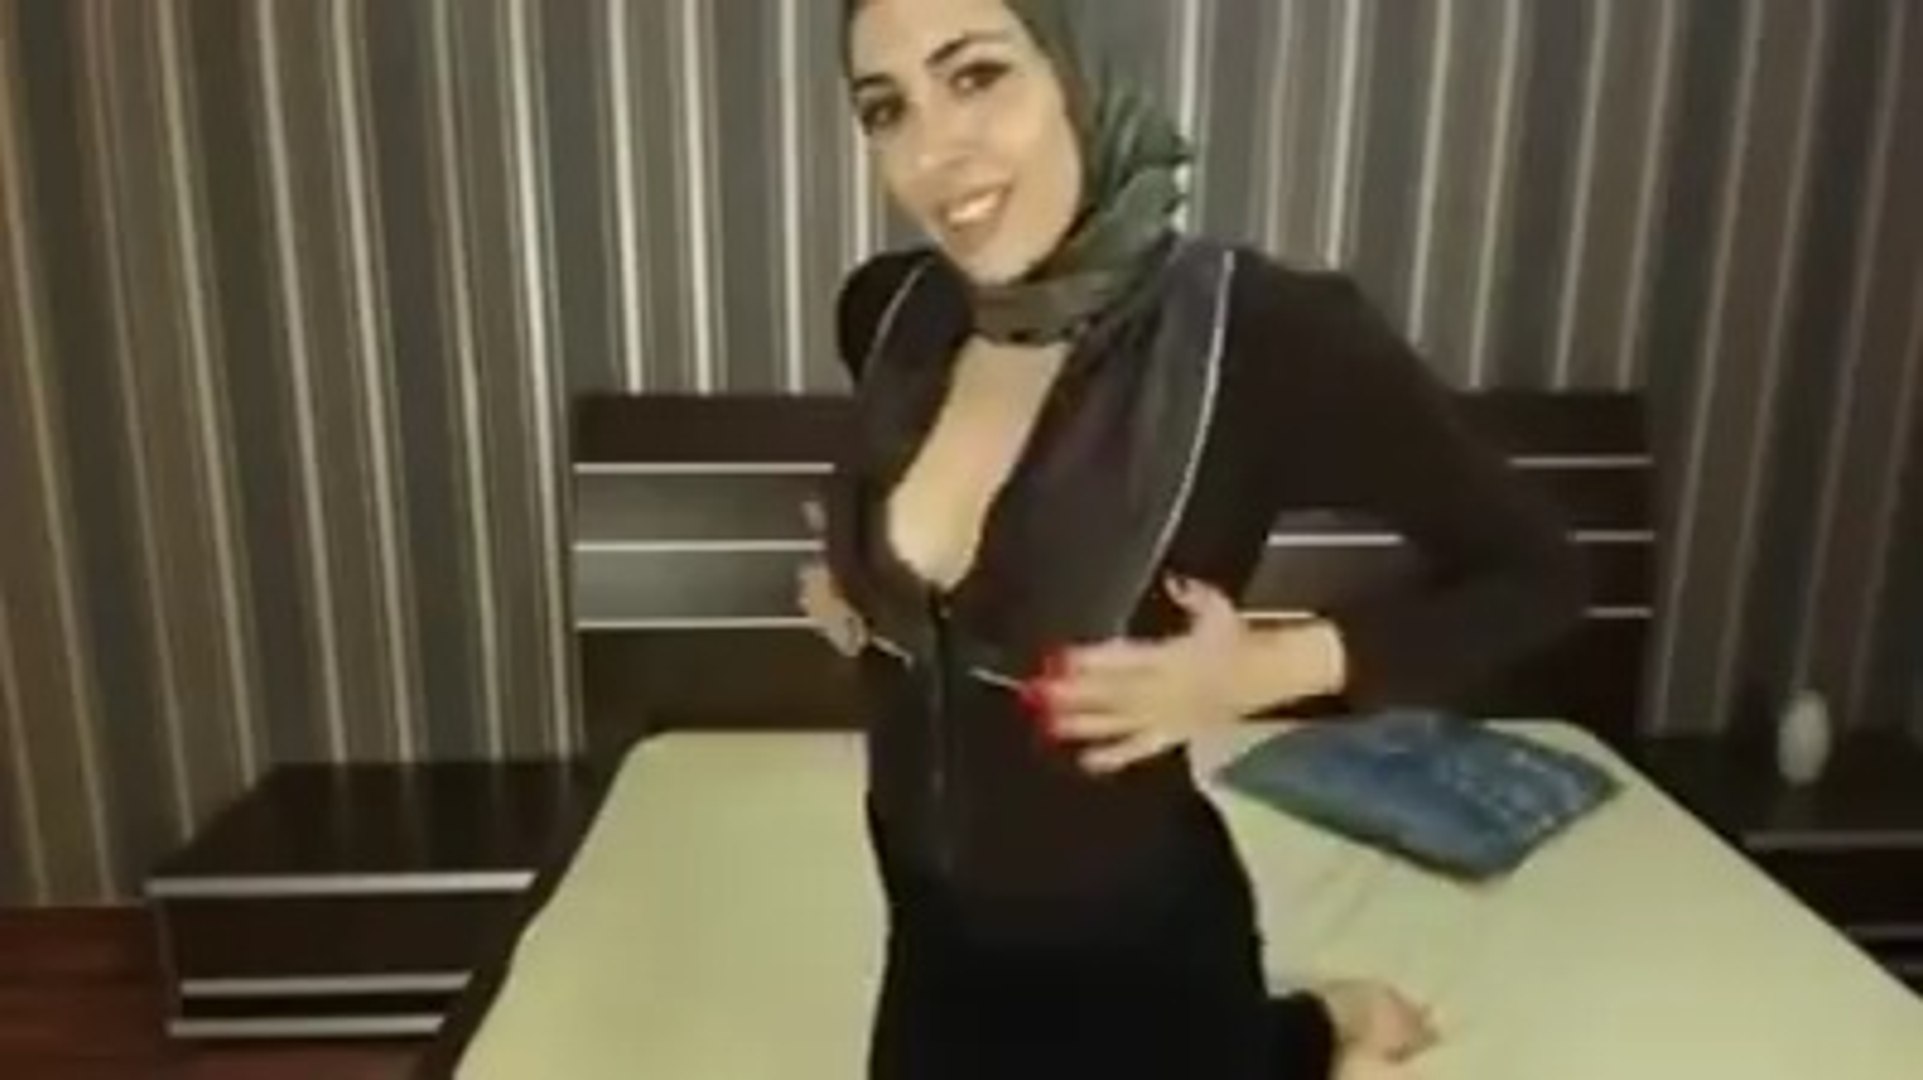 Sexy Dance by Arabs - video Dailymotion